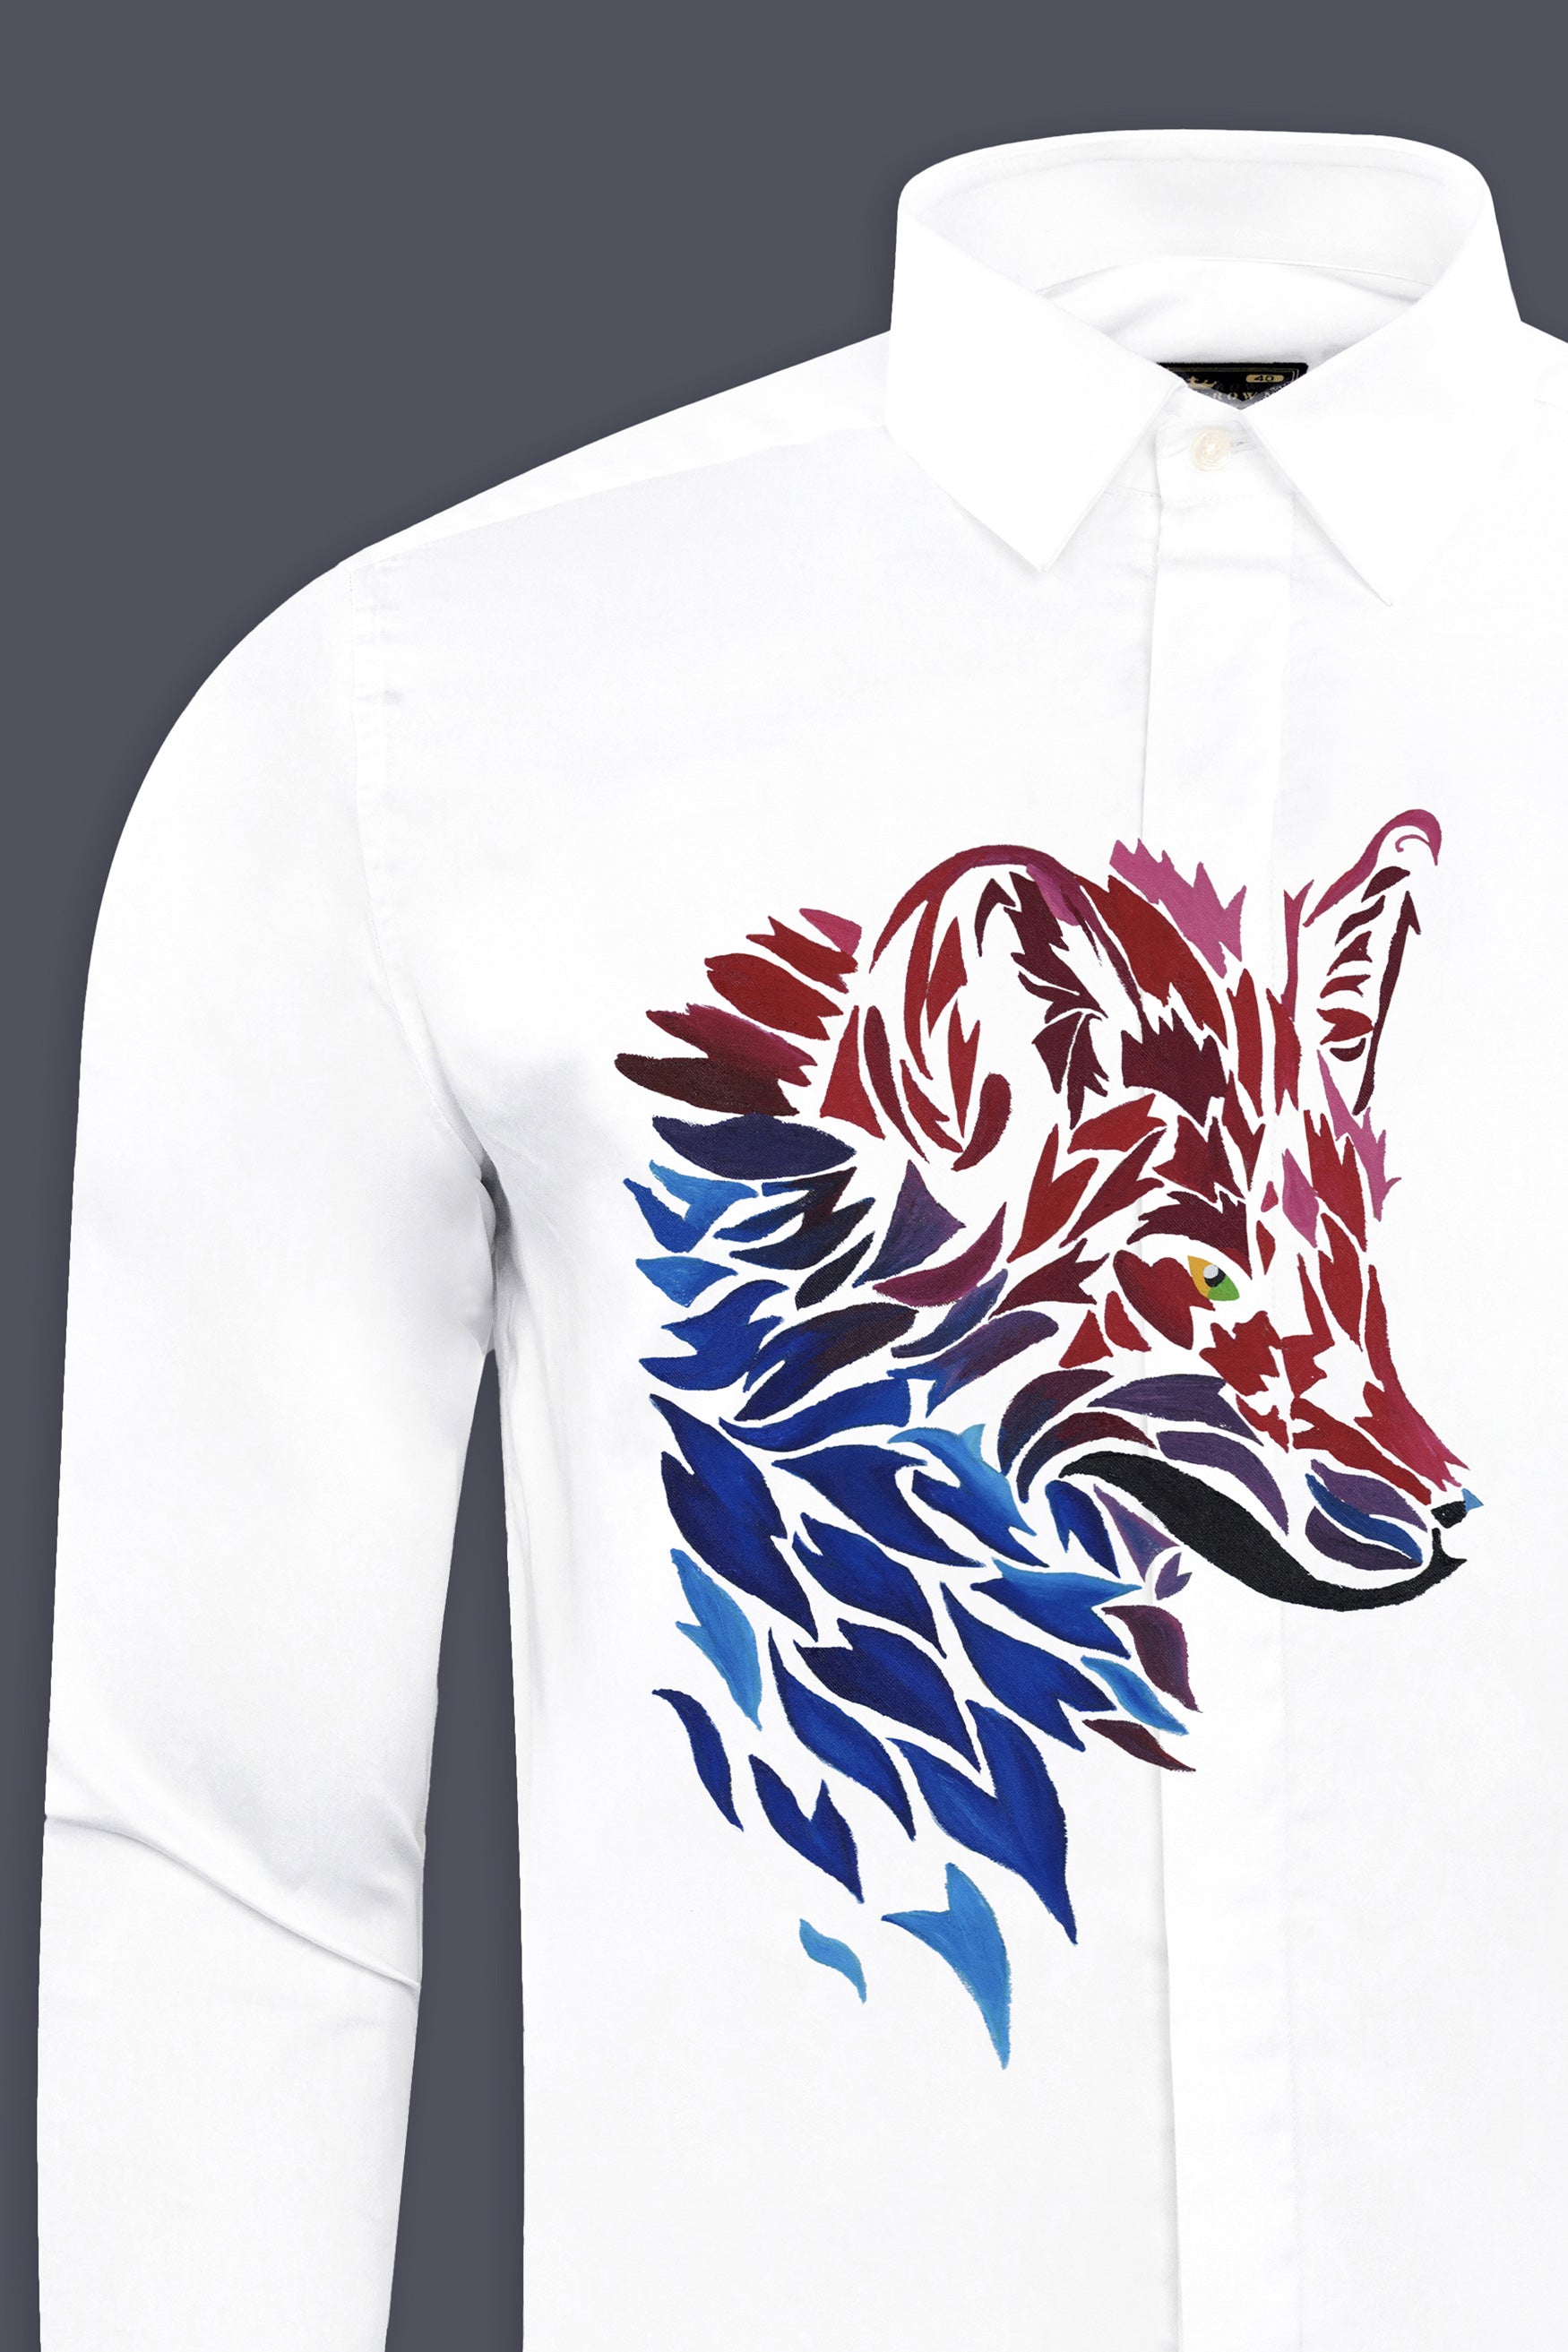 Bright White Aesthetic Wolf hand painted effect Printed Subtle Sheen Super Soft Premium Cotton Designer Shirt 12211-NP-P782-38, 12211-NP-P782-H-38, 12211-NP-P782-39, 12211-NP-P782-H-39, 12211-NP-P782-40, 12211-NP-P782-H-40, 12211-NP-P782-42, 12211-NP-P782-H-42, 12211-NP-P782-44, 12211-NP-P782-H-44, 12211-NP-P782-46, 12211-NP-P782-H-46, 12211-NP-P782-48, 12211-NP-P782-H-48, 12211-NP-P782-50, 12211-NP-P782-H-50, 12211-NP-P782-52, 12211-NP-P782-H-52